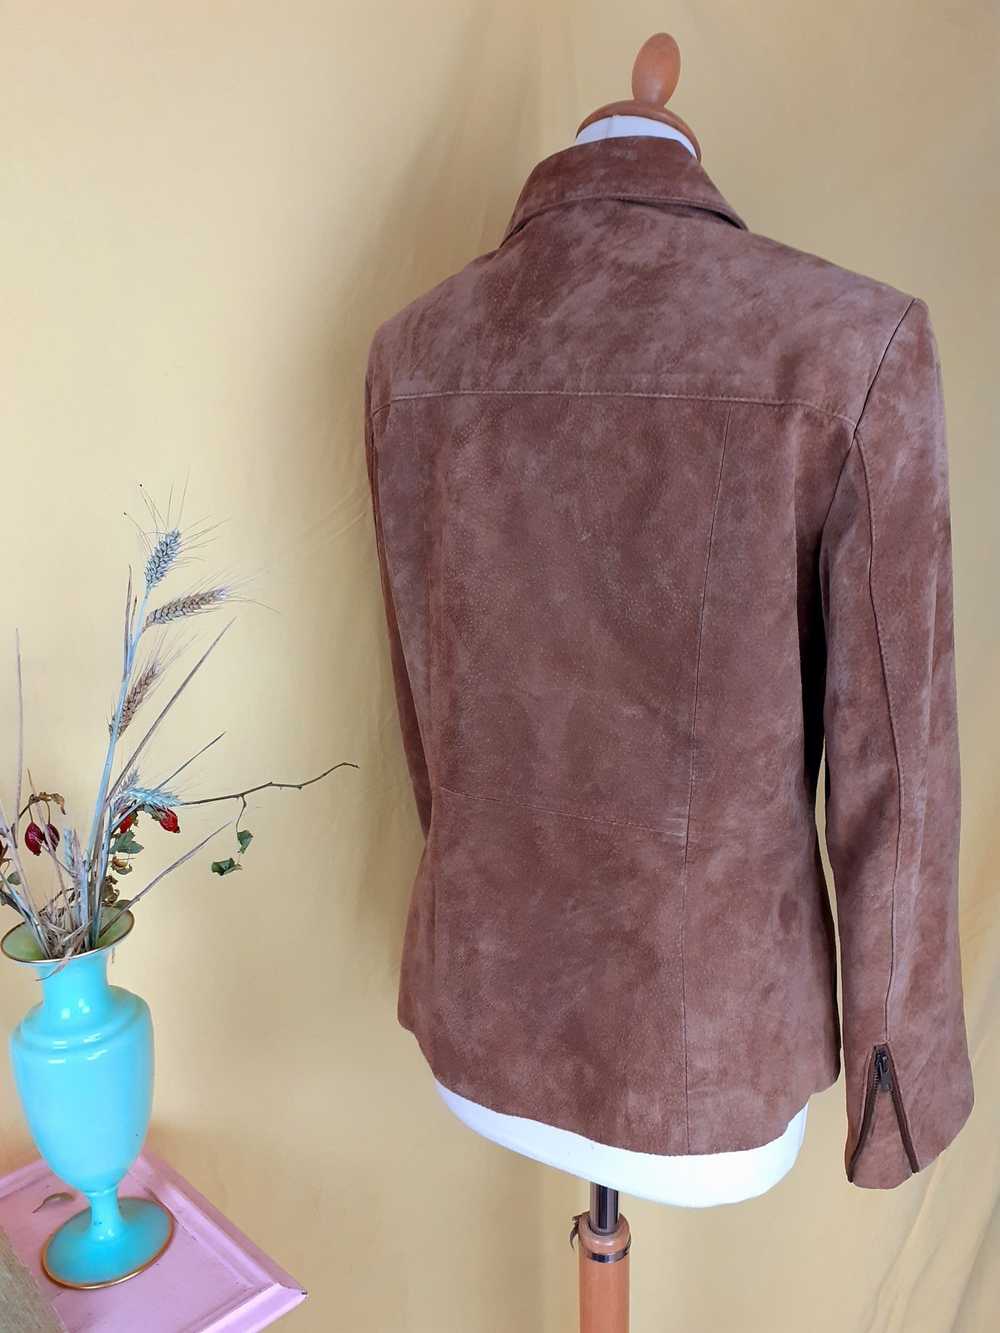 Suede jacket - Zipped jacket in natural-colored s… - image 6